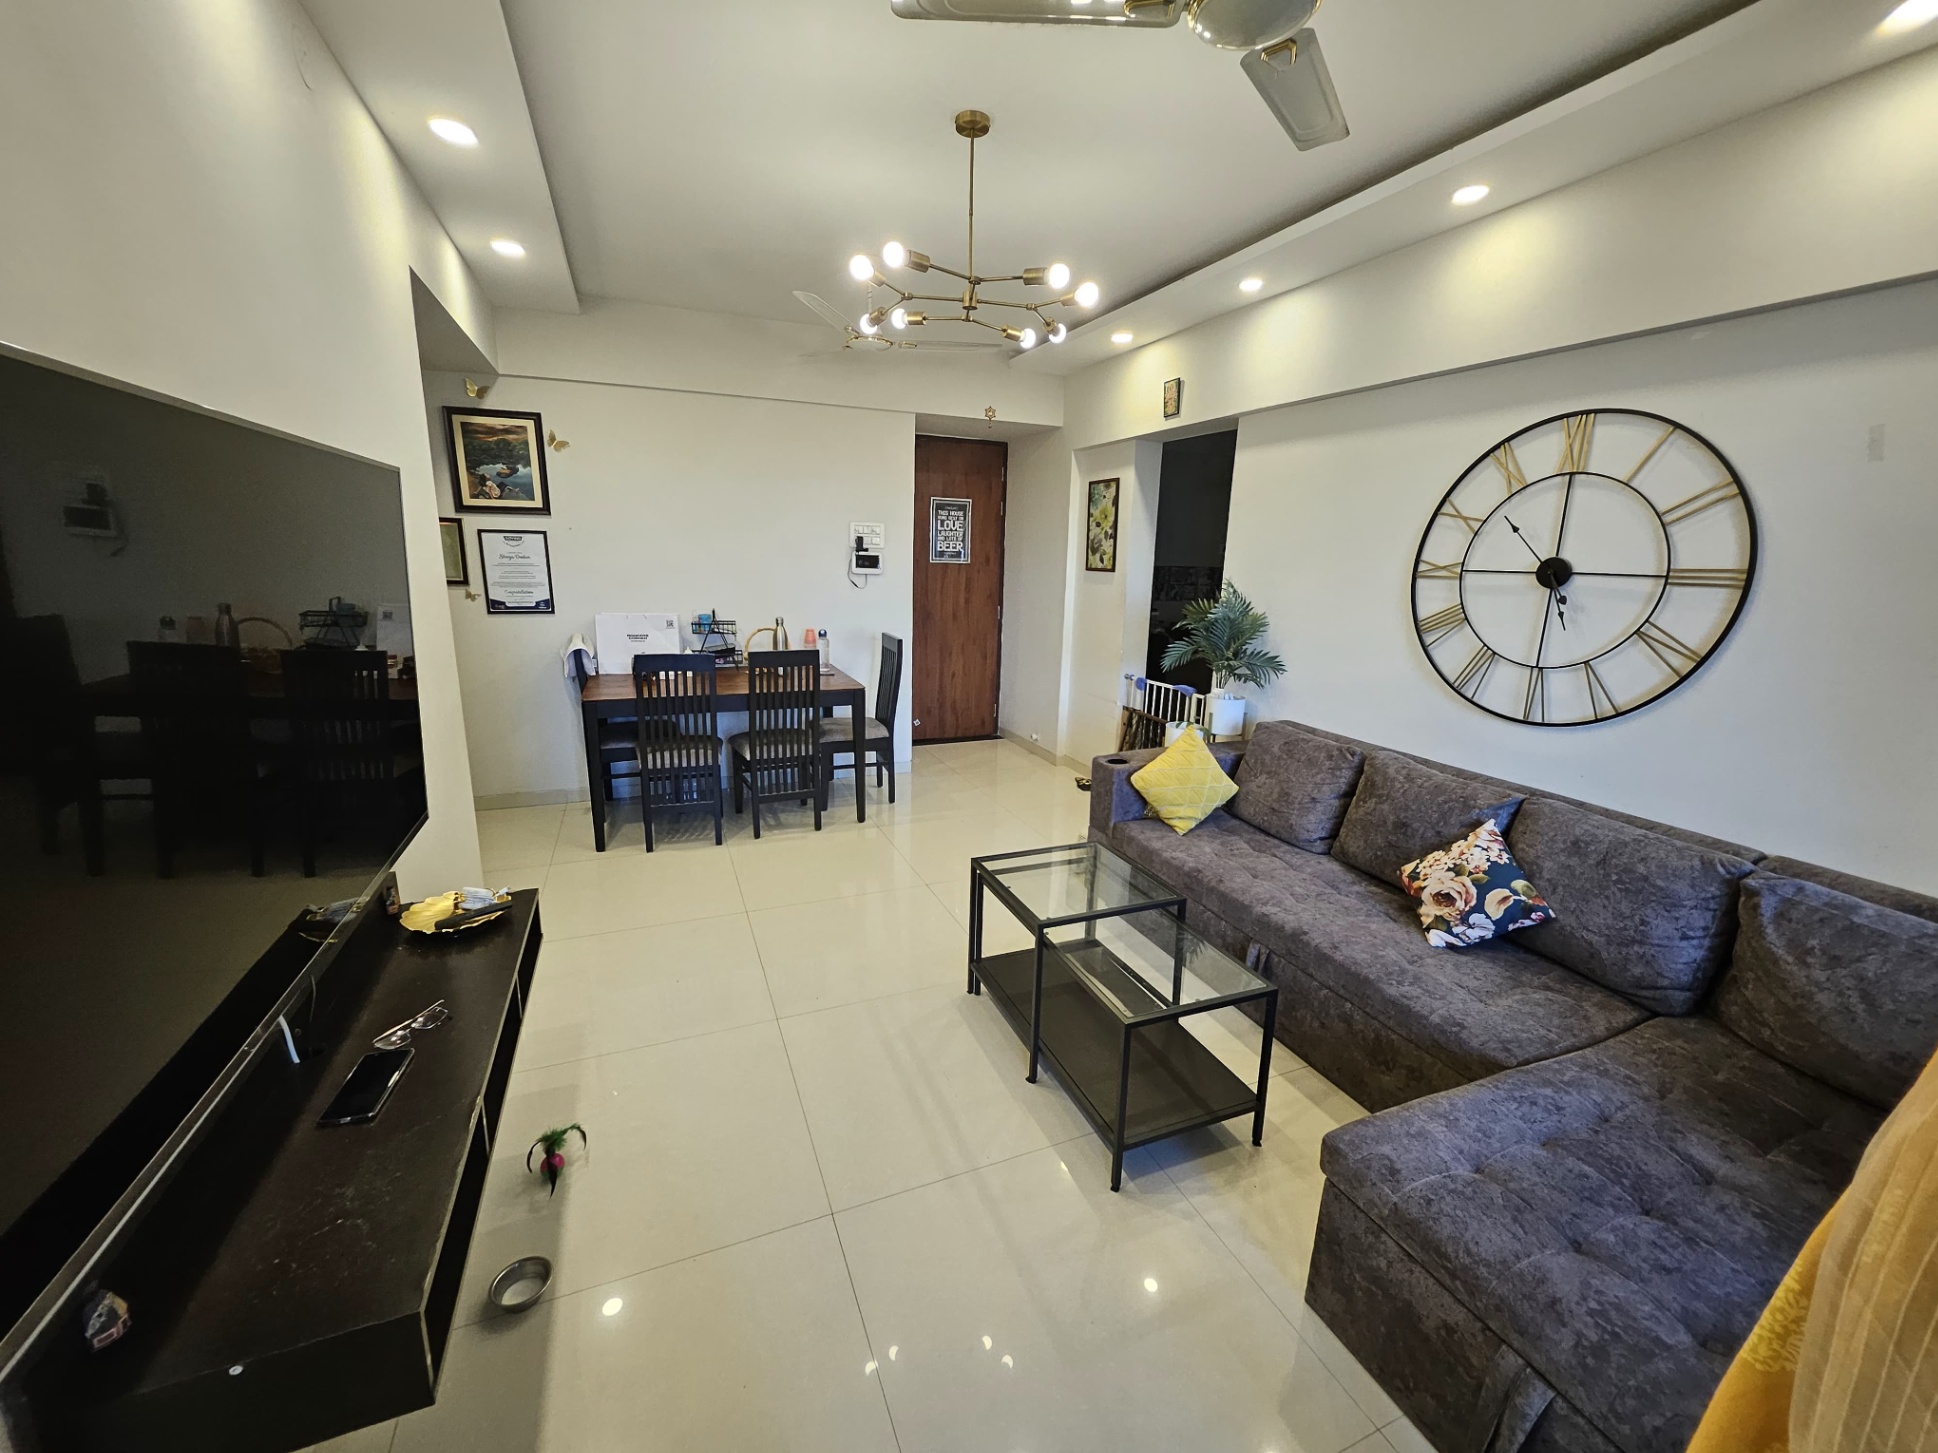 2 Bed/ 2 Bath Rent Apartment/ Flat; 767 sq. ft. carpet area, Furnished for rent @Leisure Town 